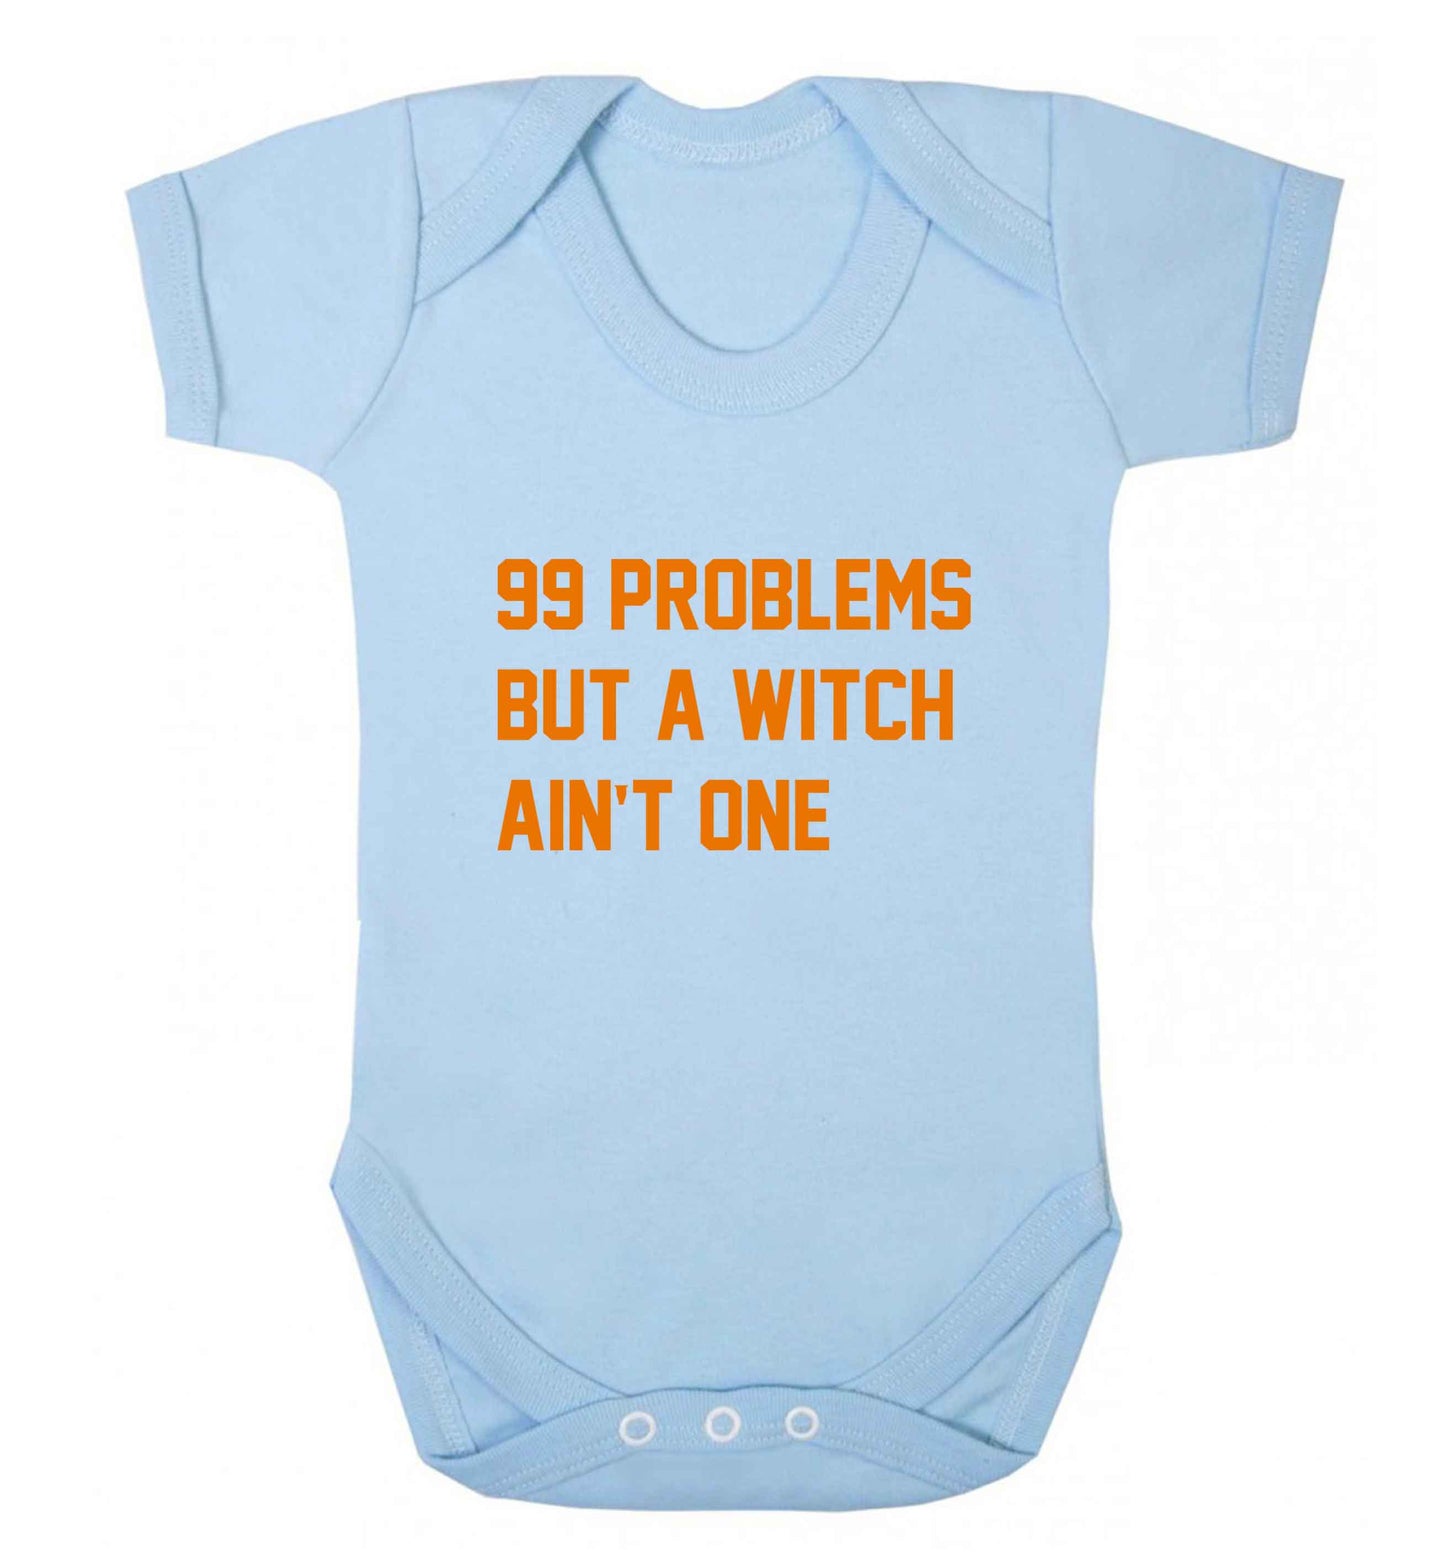 99 Problems but a witch aint one baby vest pale blue 18-24 months